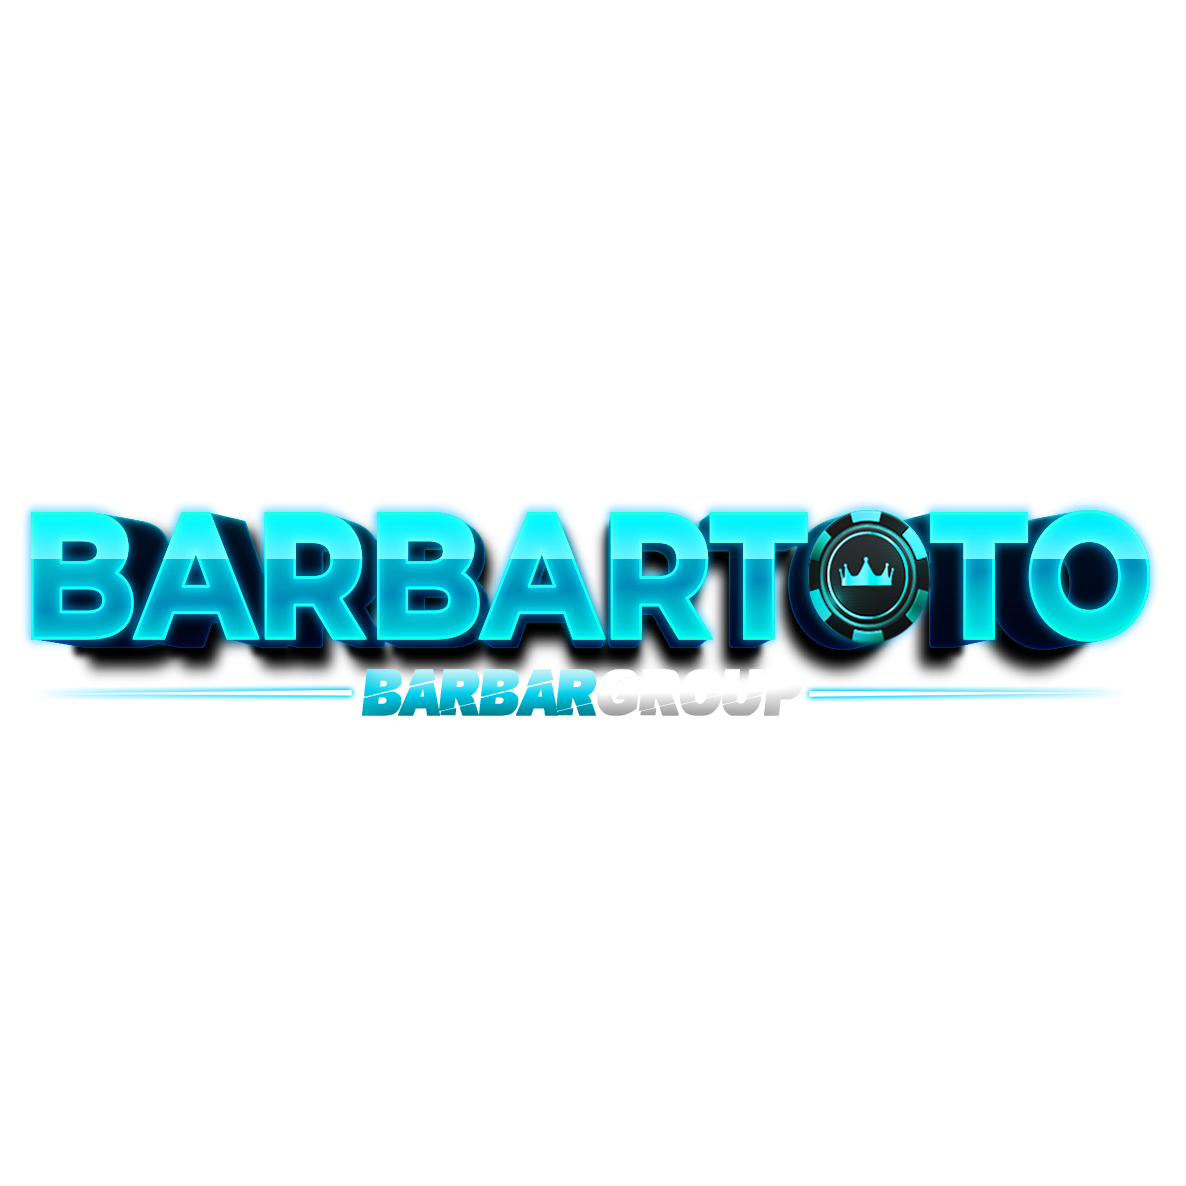 barbartoto | All social media links, exclusive content& service- Linkr